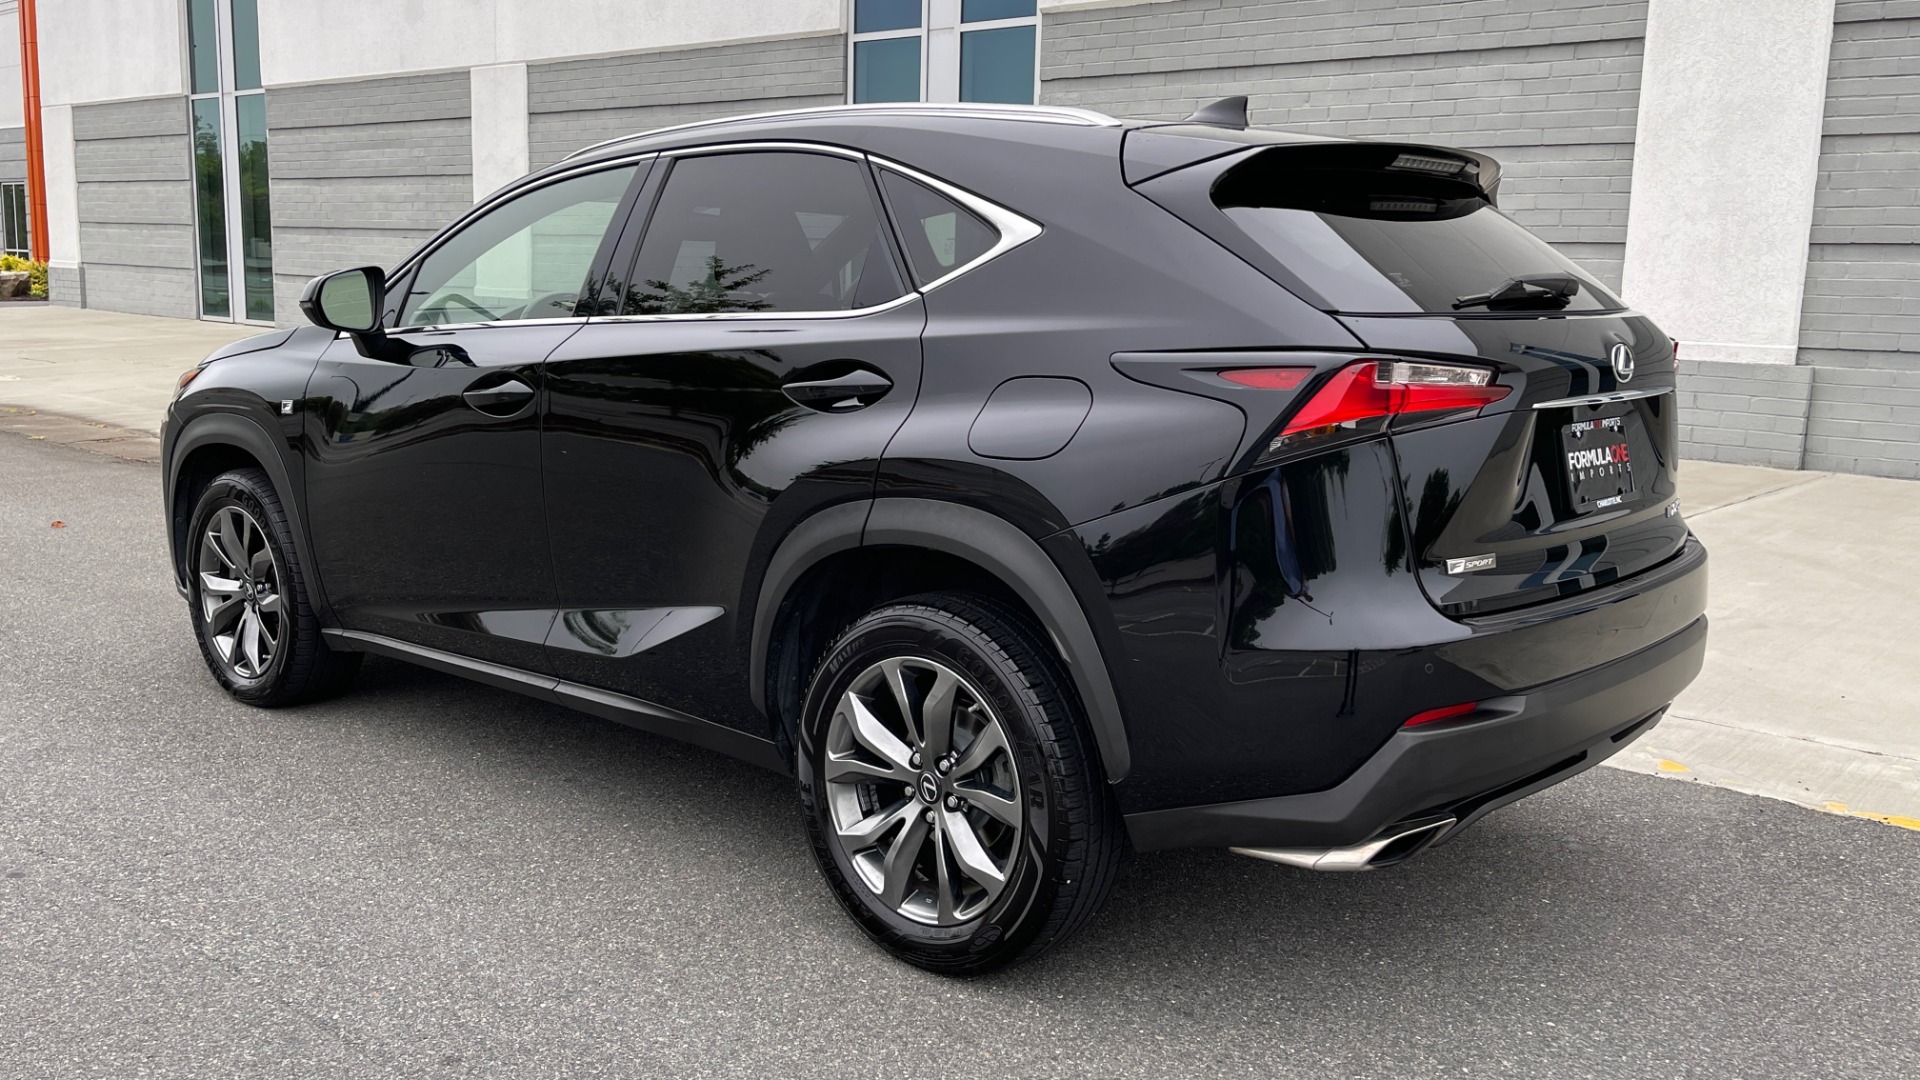 Used 2017 Lexus NX PREMIUM F-SPORT / 2.0L TURBO / BSM / PARK ASST / REARVIEW for sale Sold at Formula Imports in Charlotte NC 28227 5